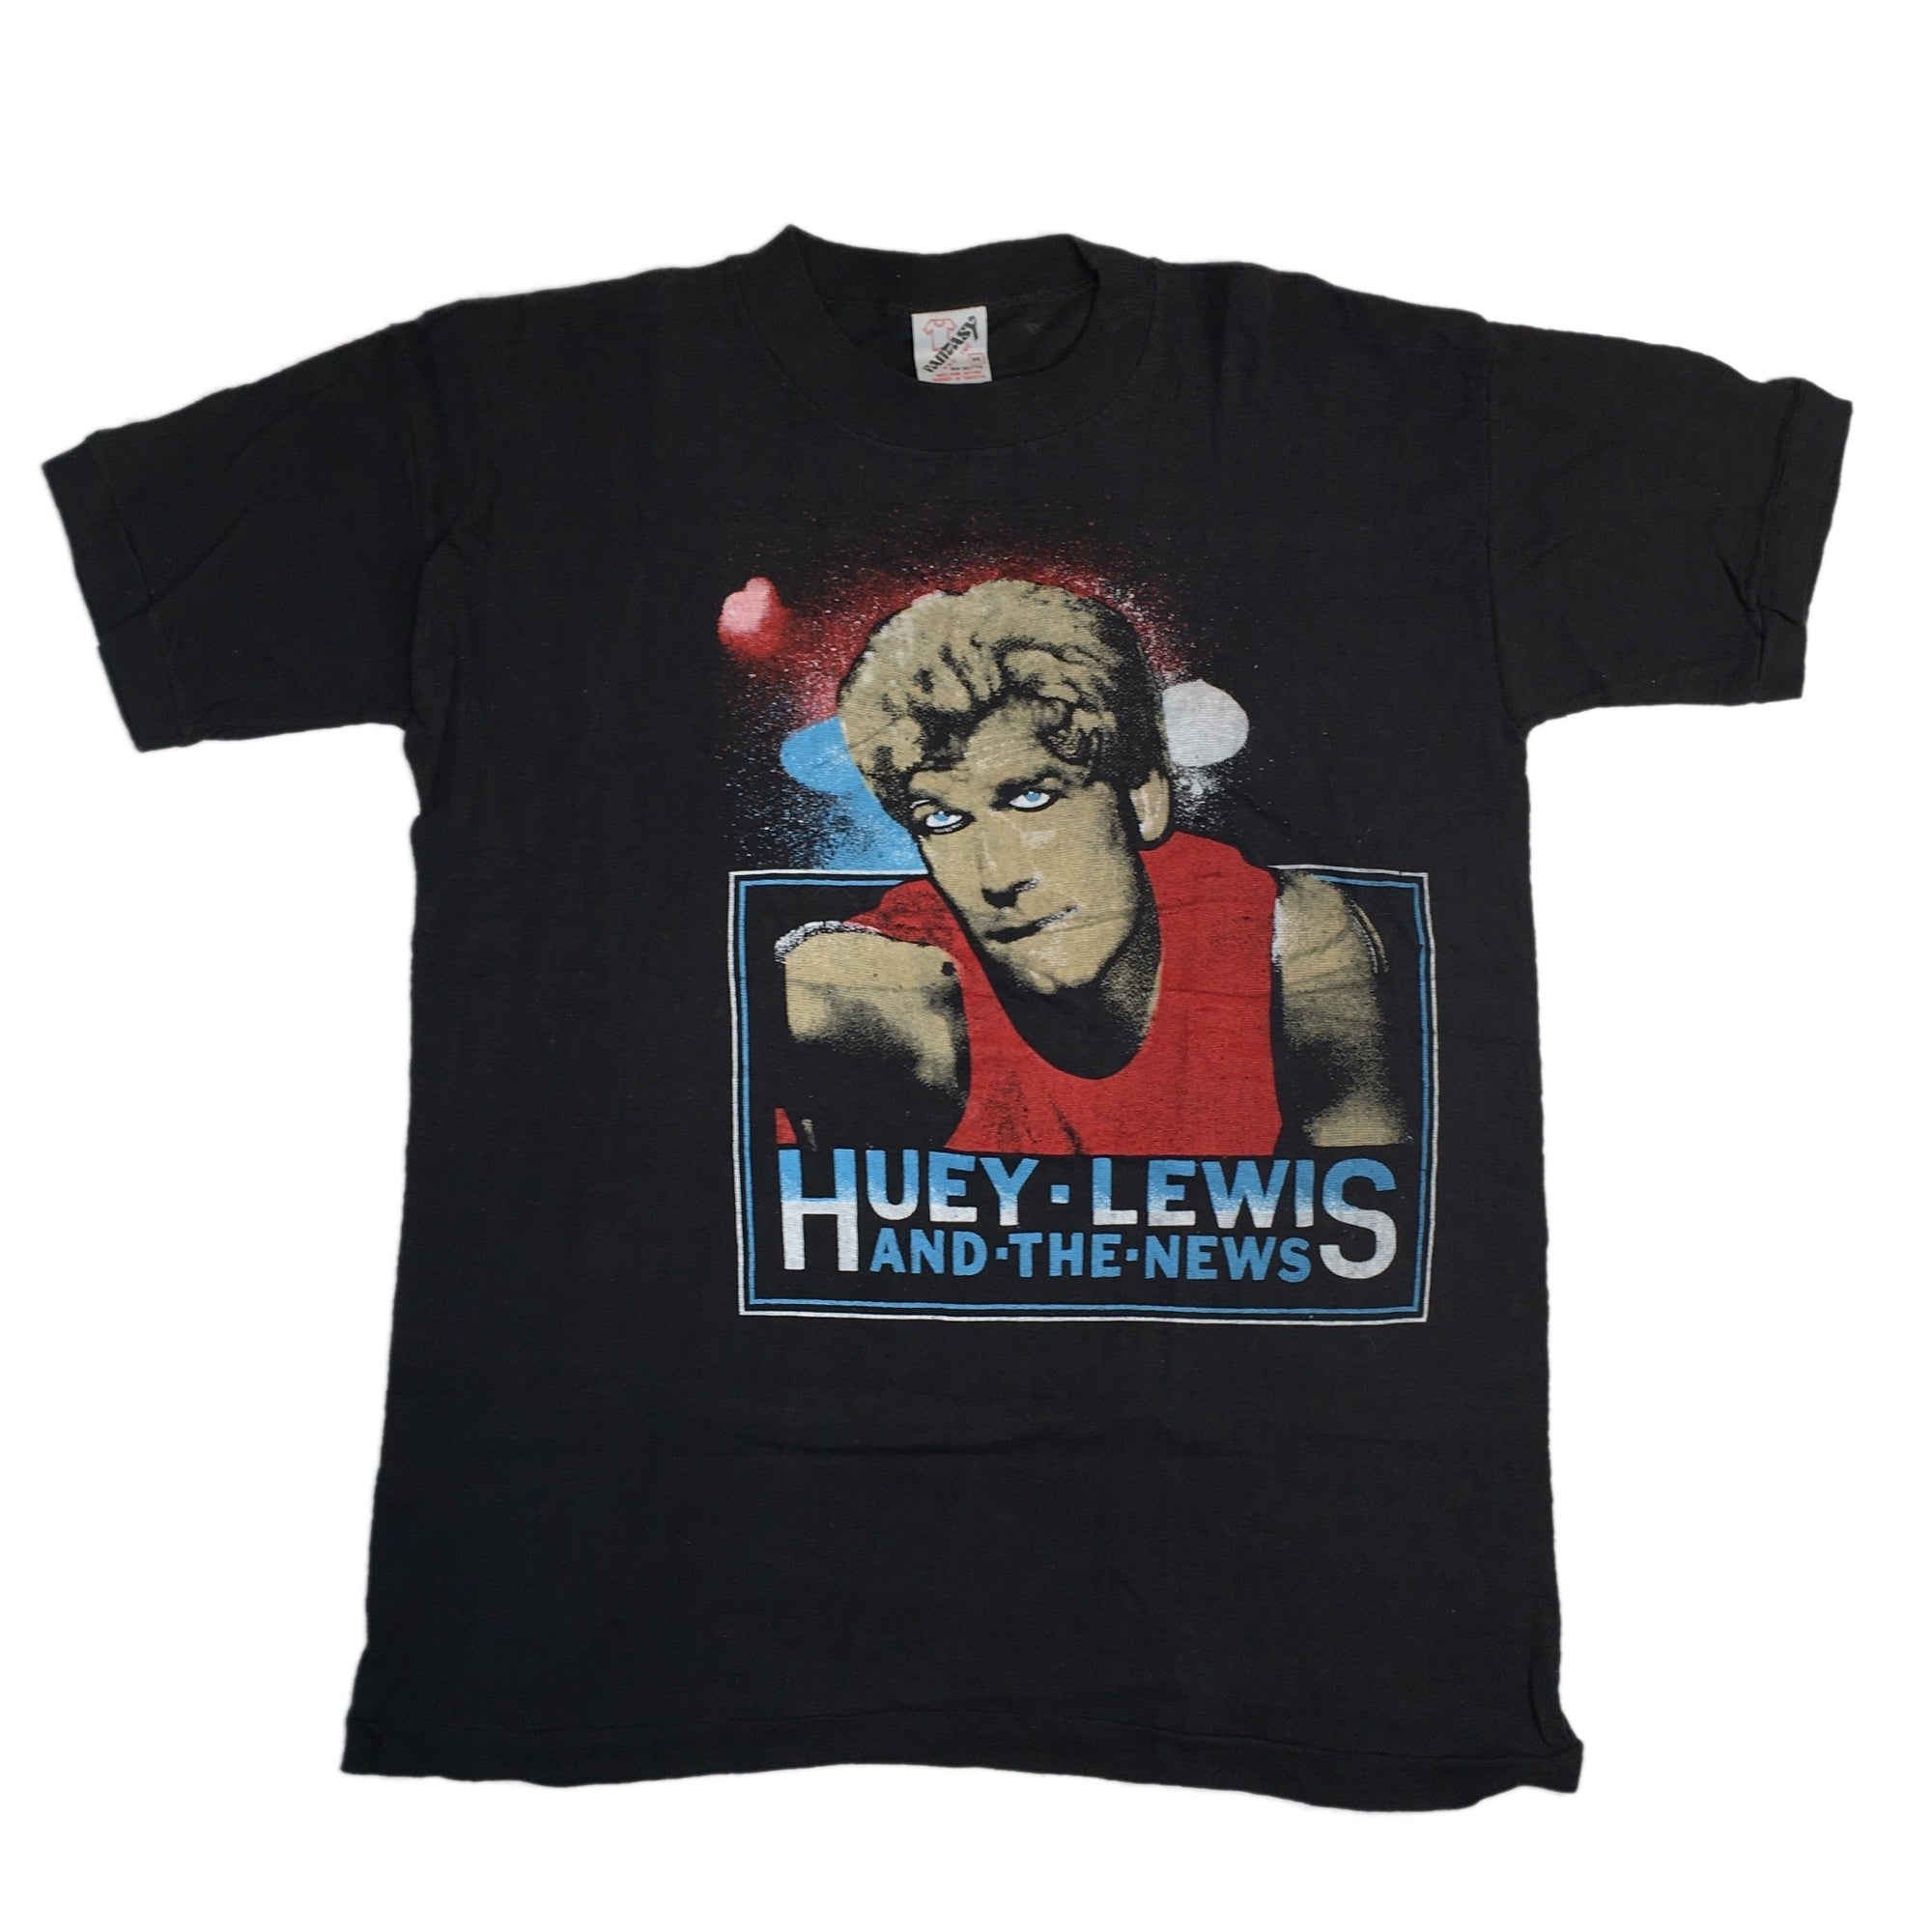 Vintage Huey Lewis And The News "1980s" T-Shirt - jointcustodydc